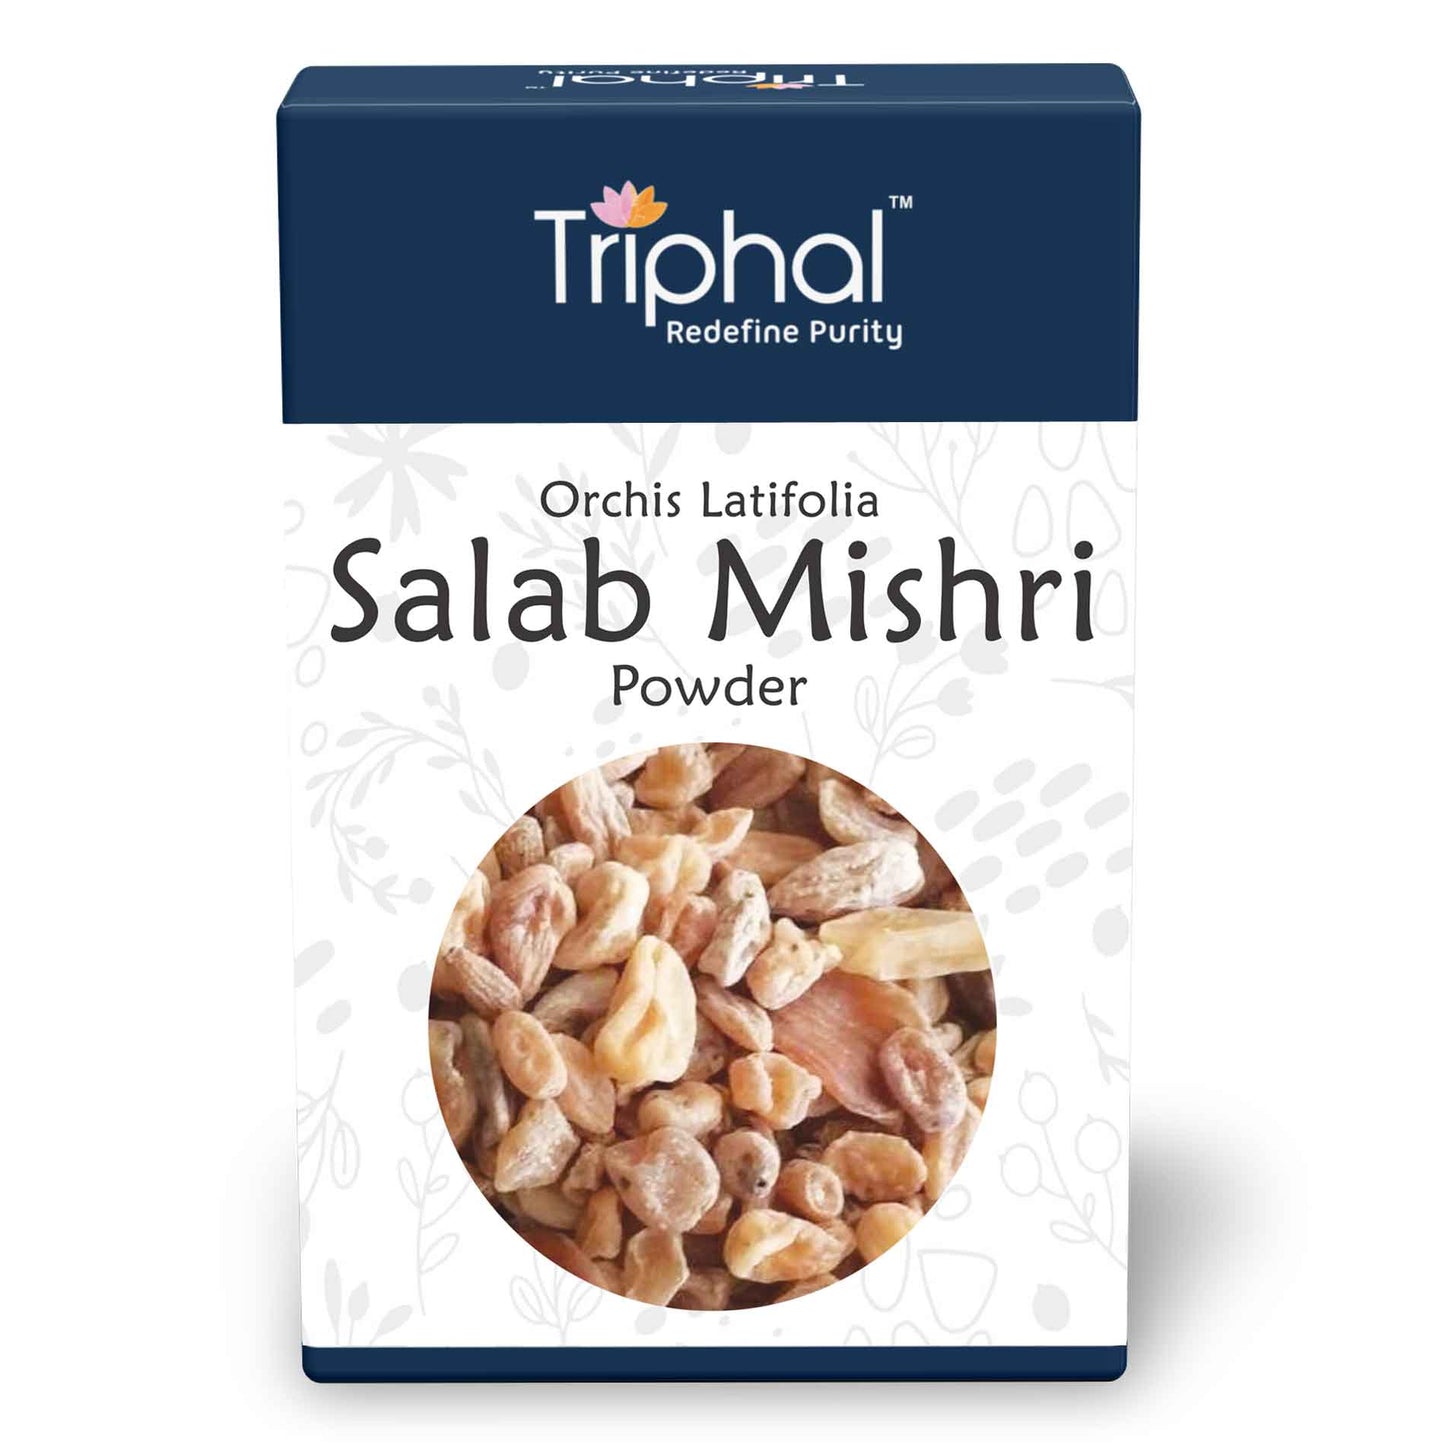 Indulge in the authentic and pure Salab Mishri Powder or Salam Misri Churna with no adulteration. Trust Triphal for the finest quality and unadulterated herbal goodness.